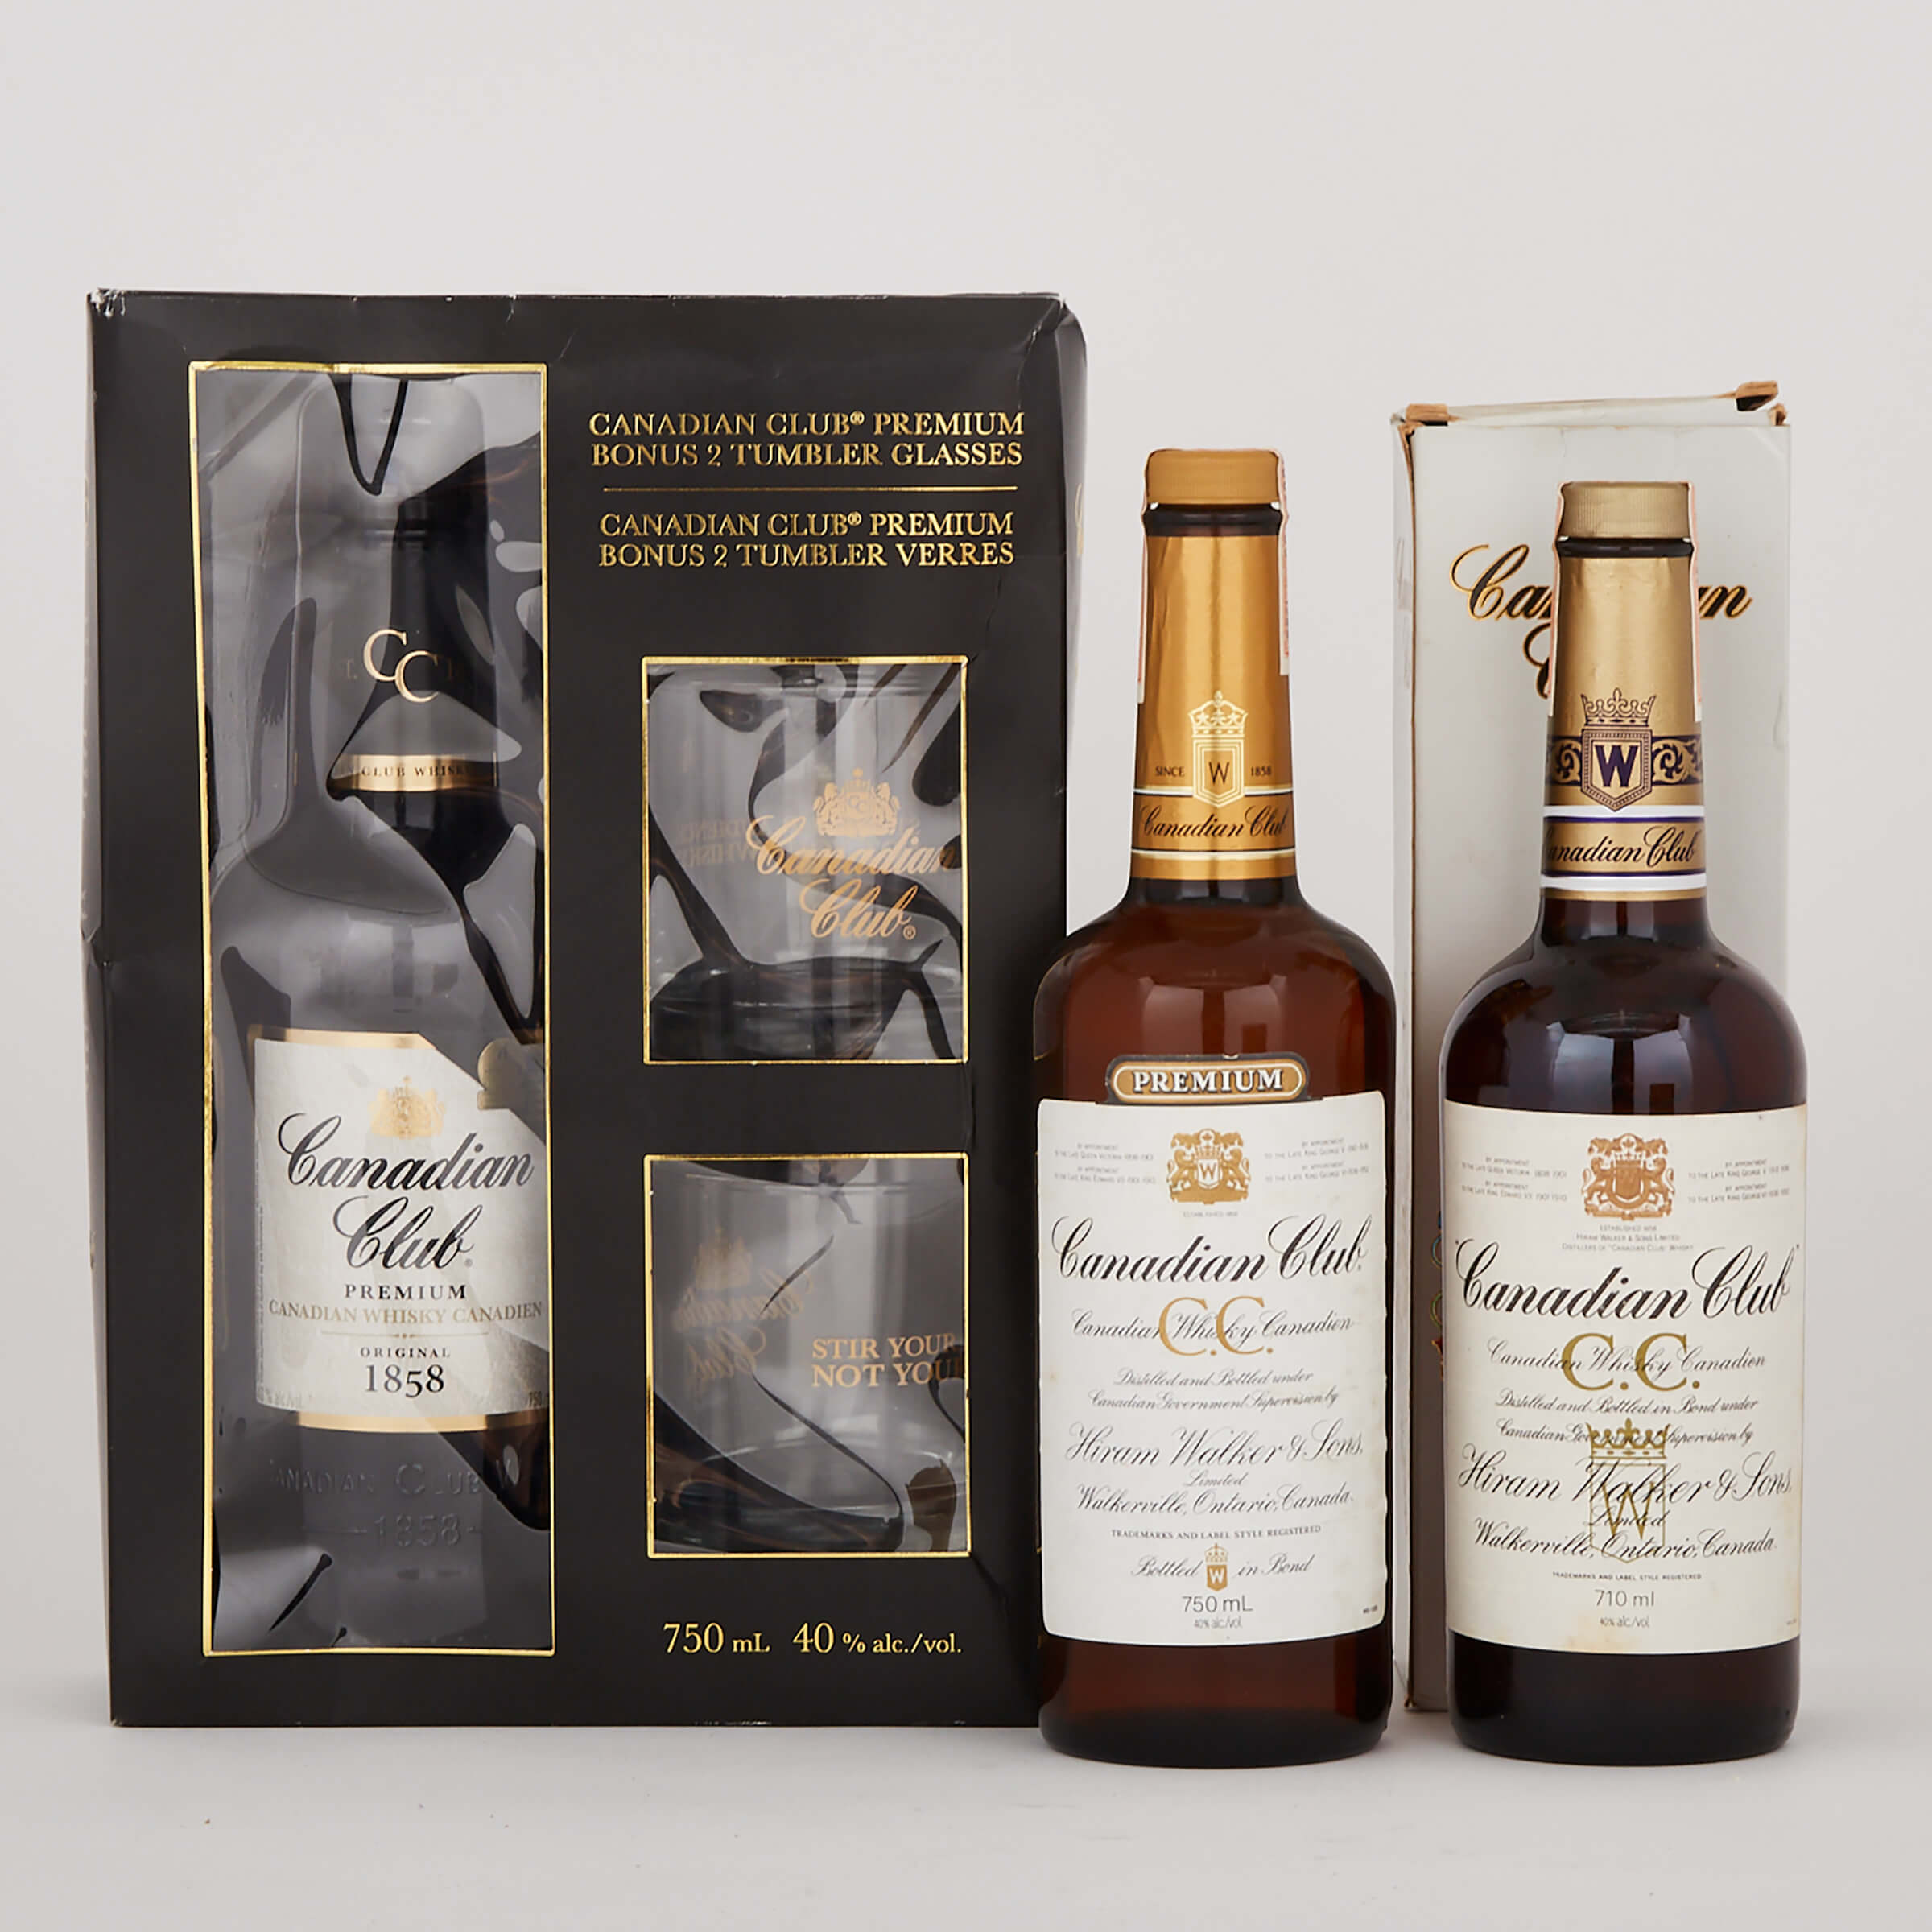 CANADIAN CLUB CANADIAN WHISKY (NAS) (ONE 710 ML)
CANADIAN CLUB PREMIUM CANADIAN WHISKY (NAS) (ONE 750 ML)
CANADIAN CLUB PREMIUM CANADIAN WHISKY (NAS) (ONE 750 ML)